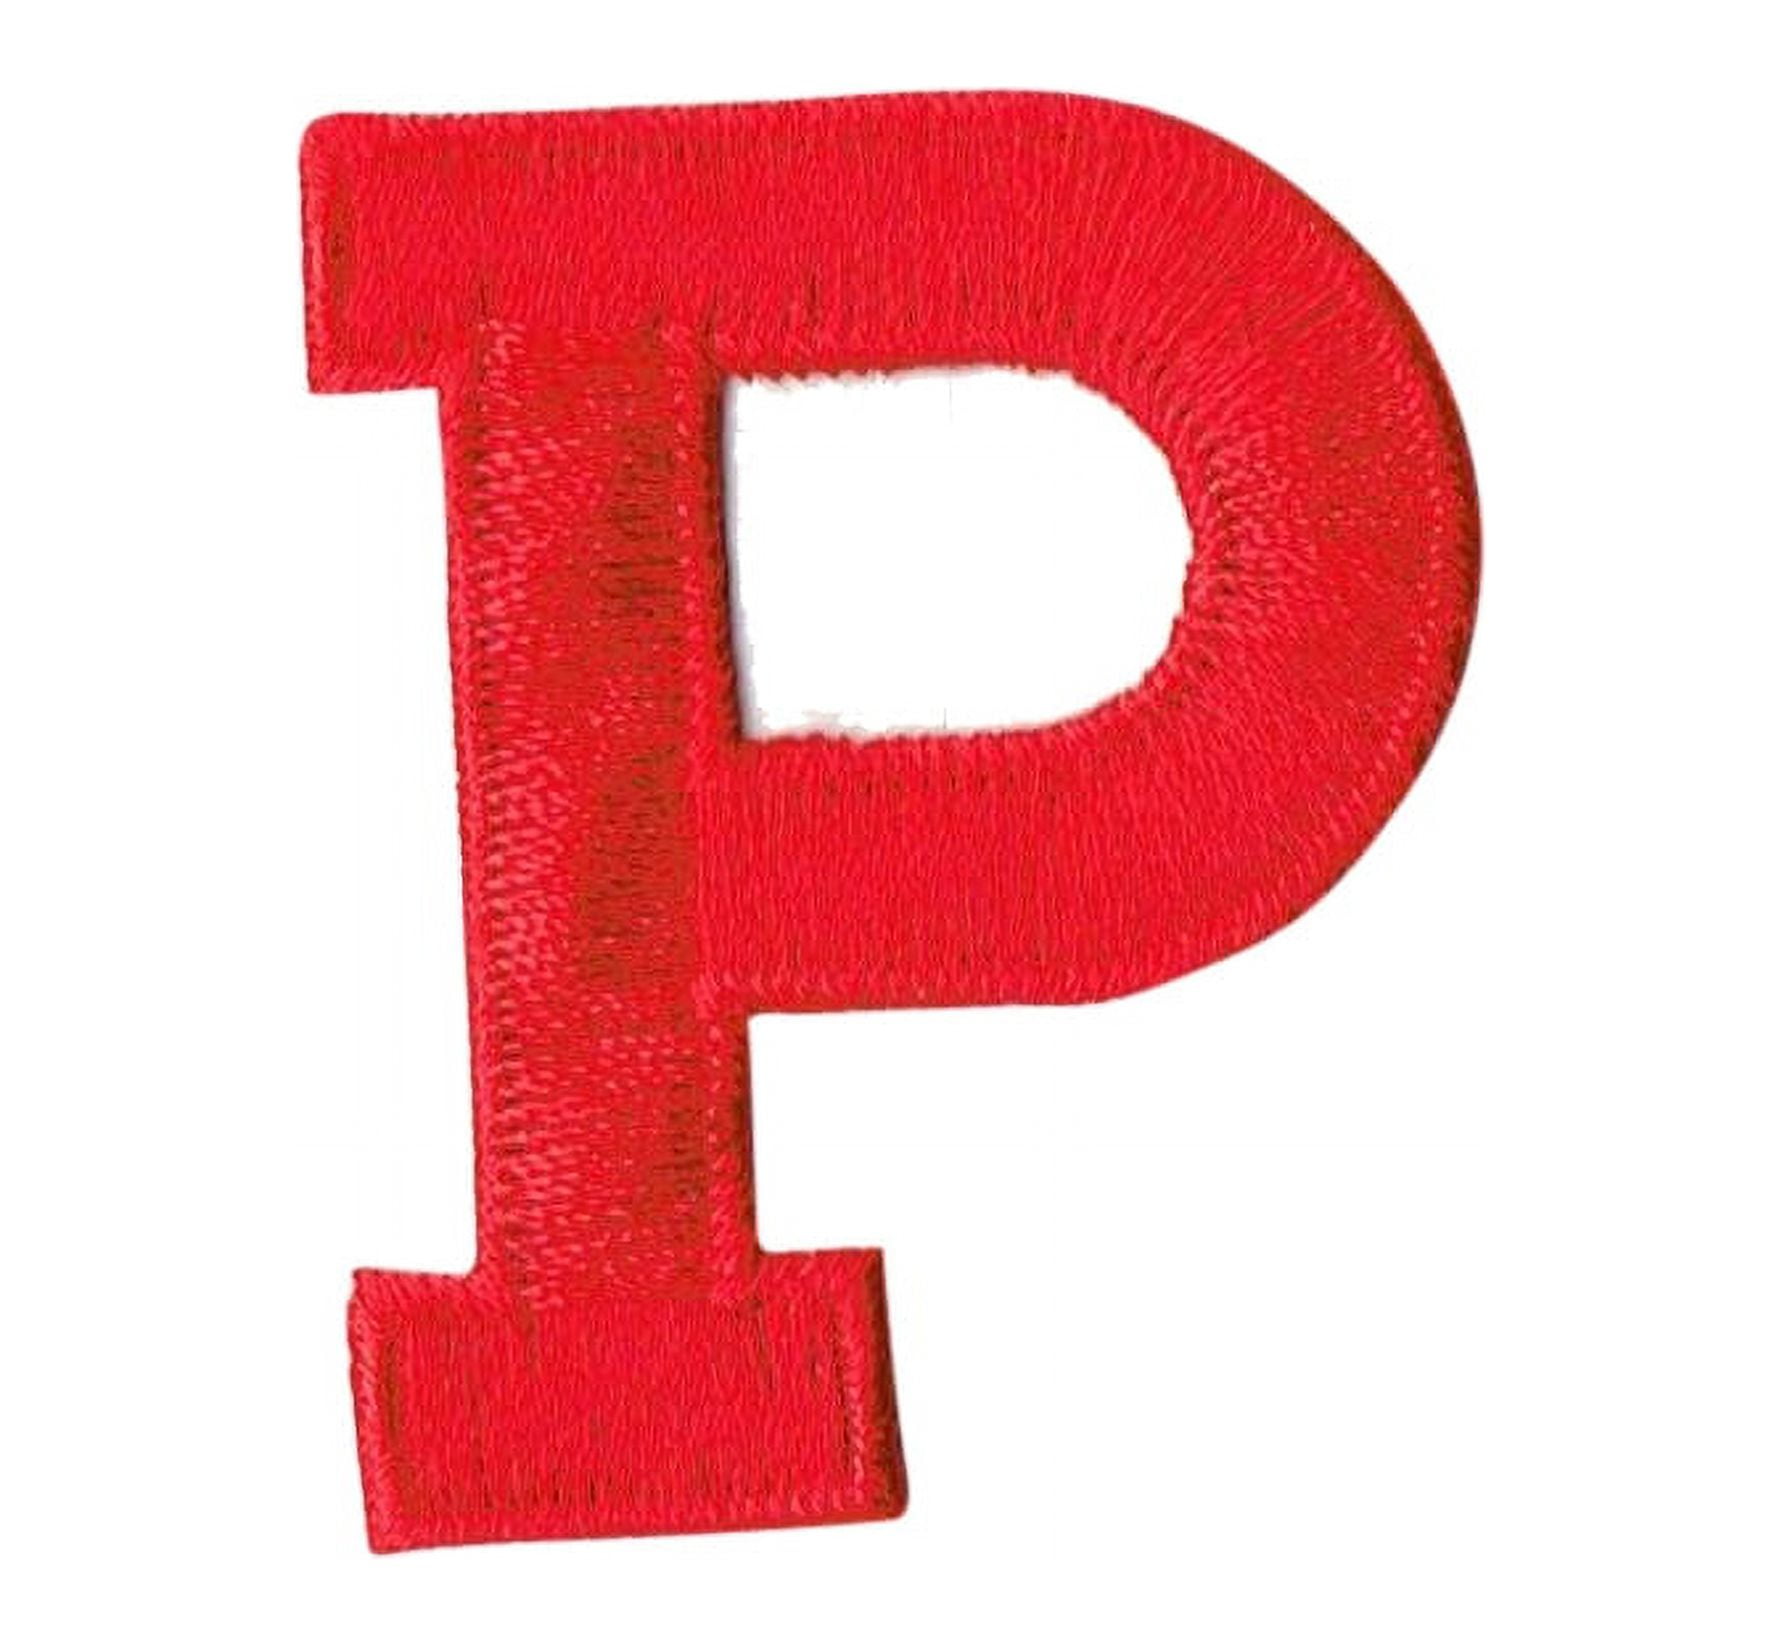 3 Embroidered Iron-On Letter Patches, Alphabet Appliques, Letter Patches  for Clothing, DIY Craft - Red/White